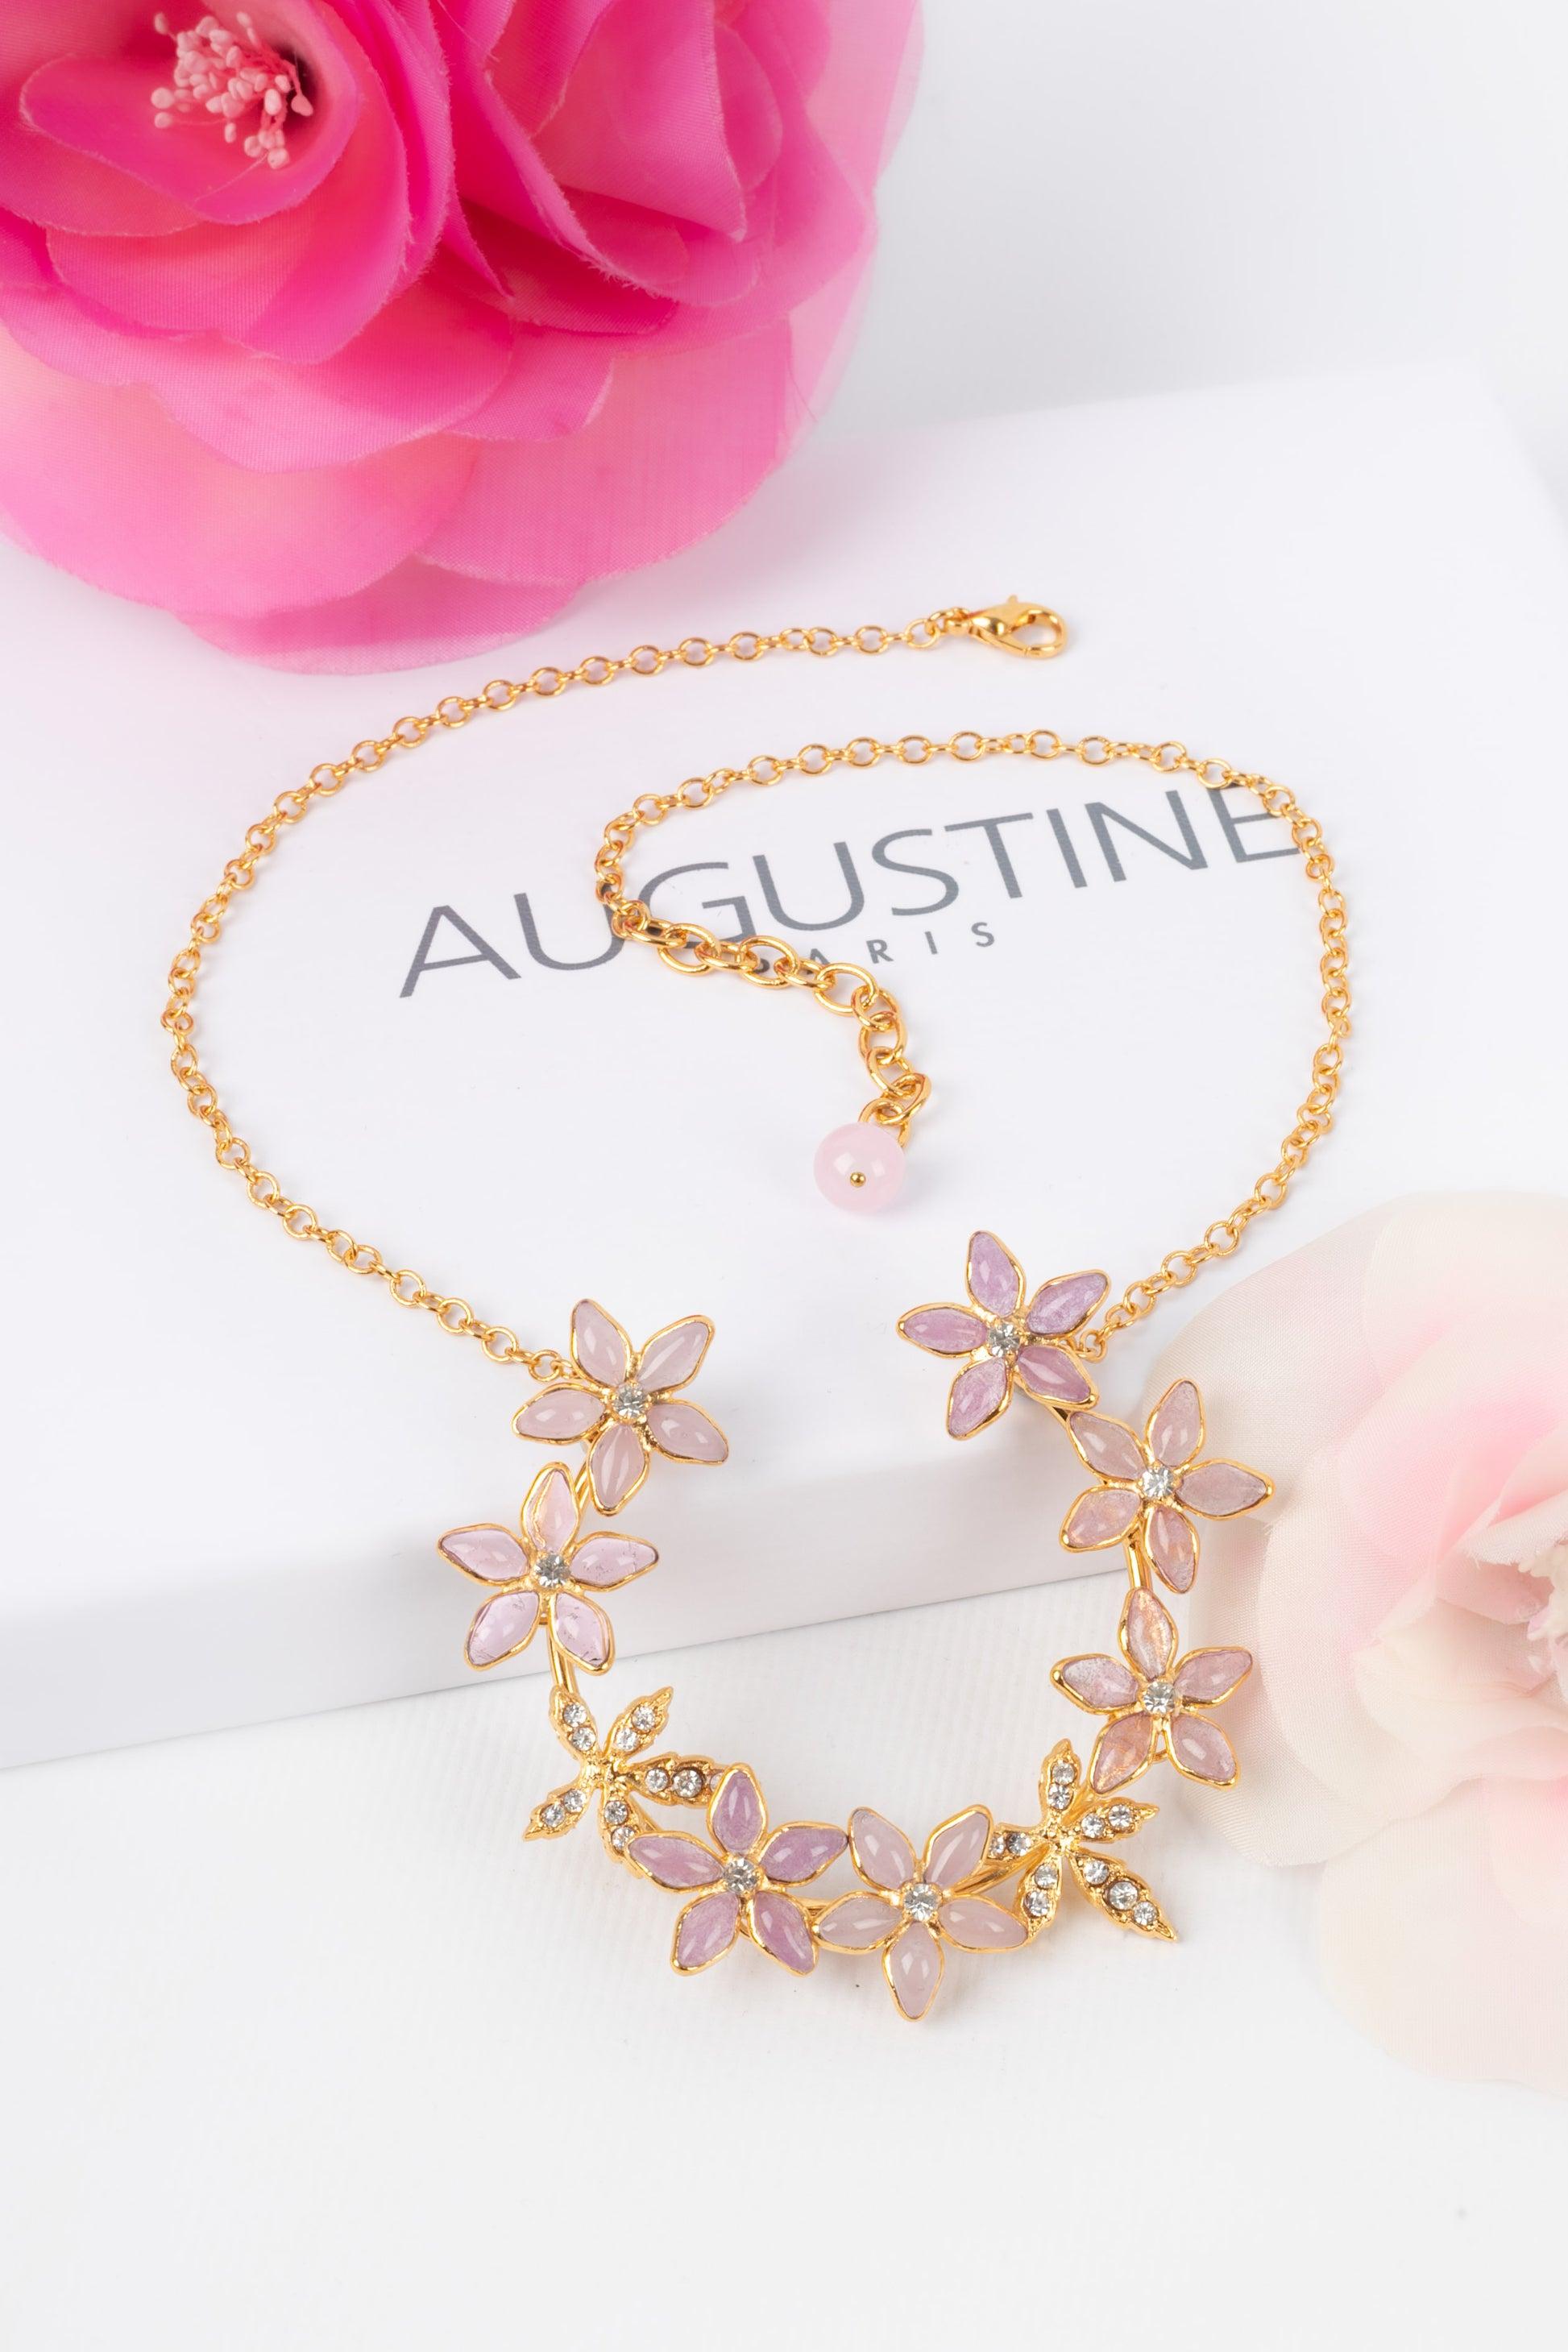 Augustine Golden Metal Necklace with Rhinestones and Glass Paste Pale Pink Tones For Sale 5